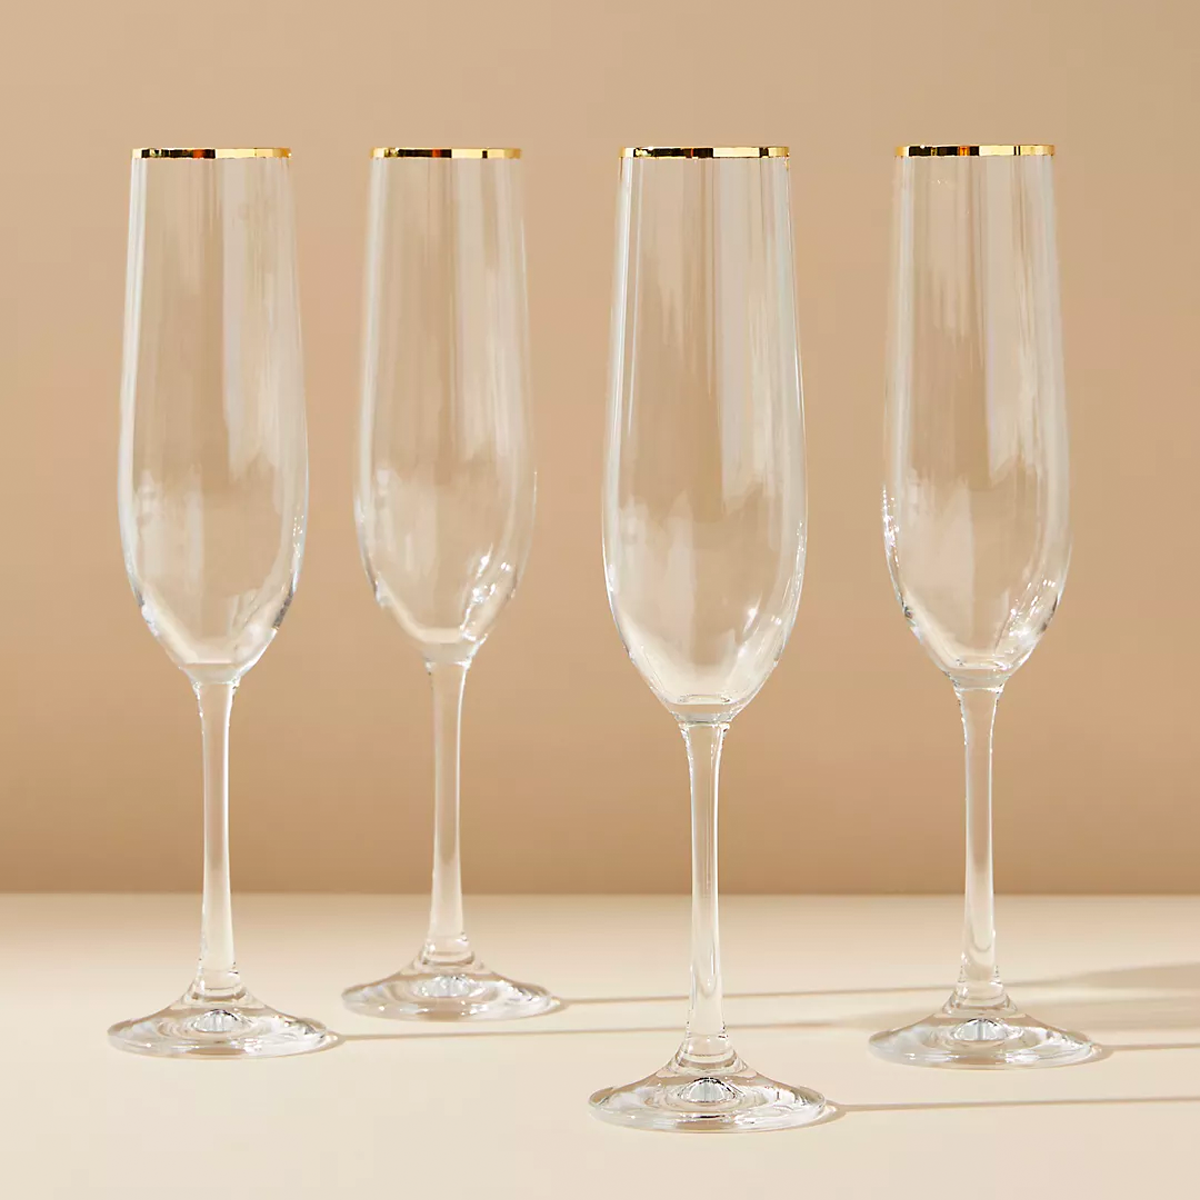 <p>Long after you pop bottles at their graduation party, these cute champagne flutes will keep the celebration going in their first apartment.</p> <p><em>Save when you shop for the best graduation gift ideas with these <a href="https://www.glamour.com/coupons/anthropologie?mbid=synd_msn_rss&utm_source=msn&utm_medium=syndication">Anthropologie promo codes</a></em>.</p> $72, Anthropologie. <a href="https://www.anthropologie.com/shop/waterfall-flutes-set-of-4">Get it now!</a><p>Sign up for today’s biggest stories, from pop culture to politics.</p><a href="https://www.glamour.com/newsletter/news?sourceCode=msnsend">Sign Up</a>